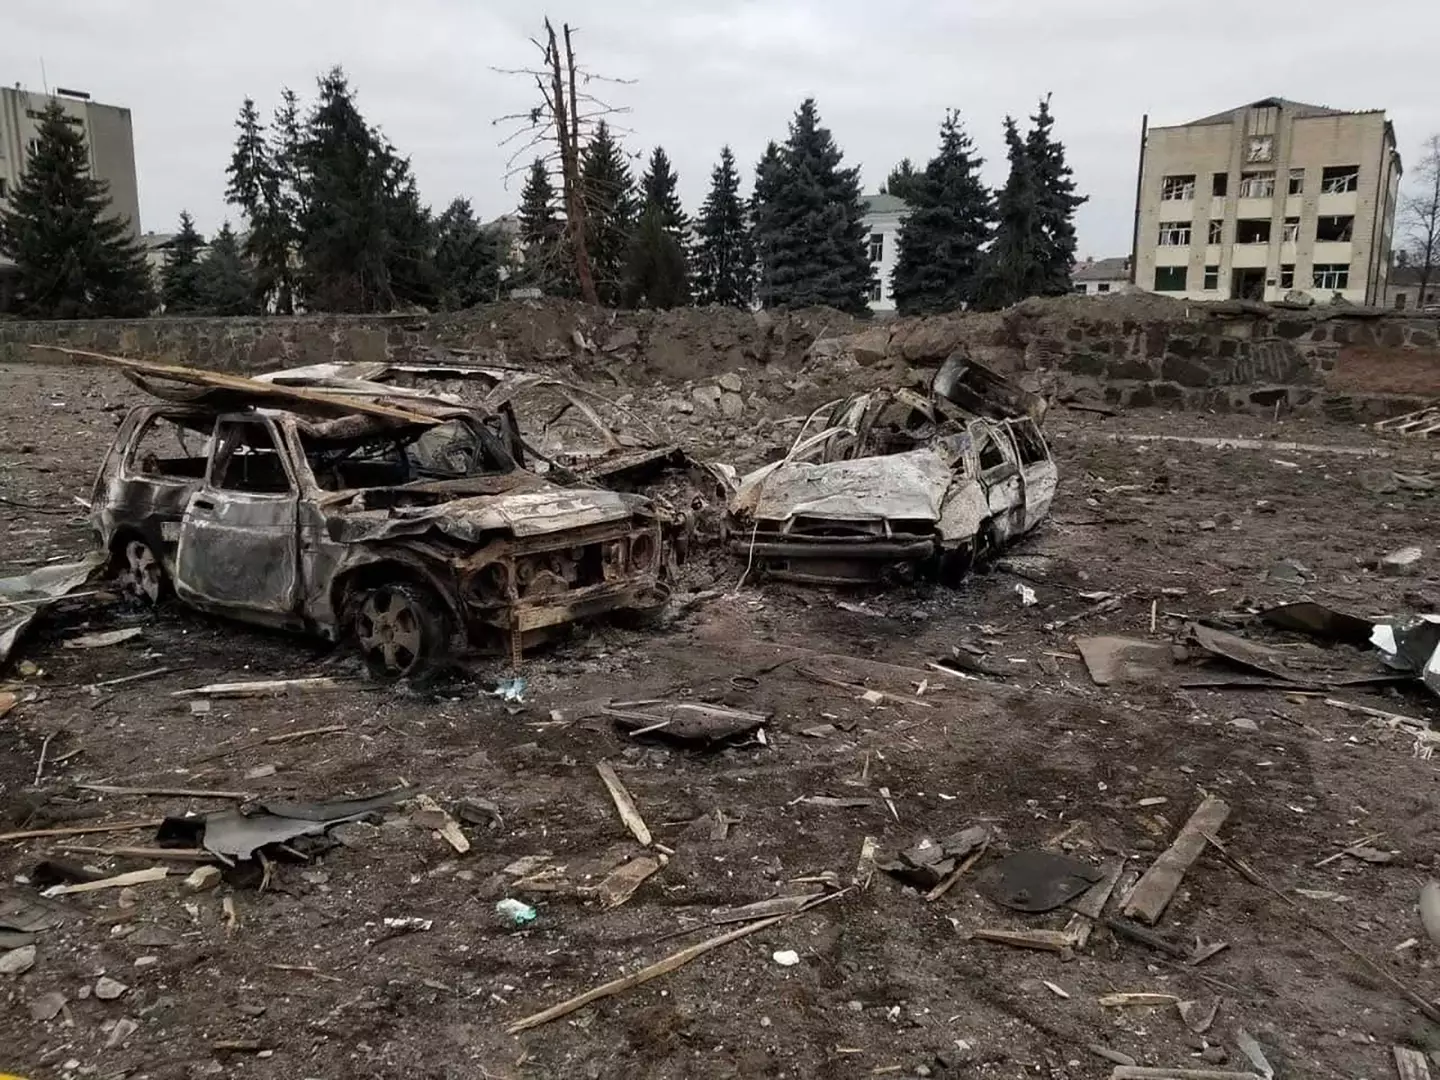 Remains of cars and residential buildings in Chernihiv.